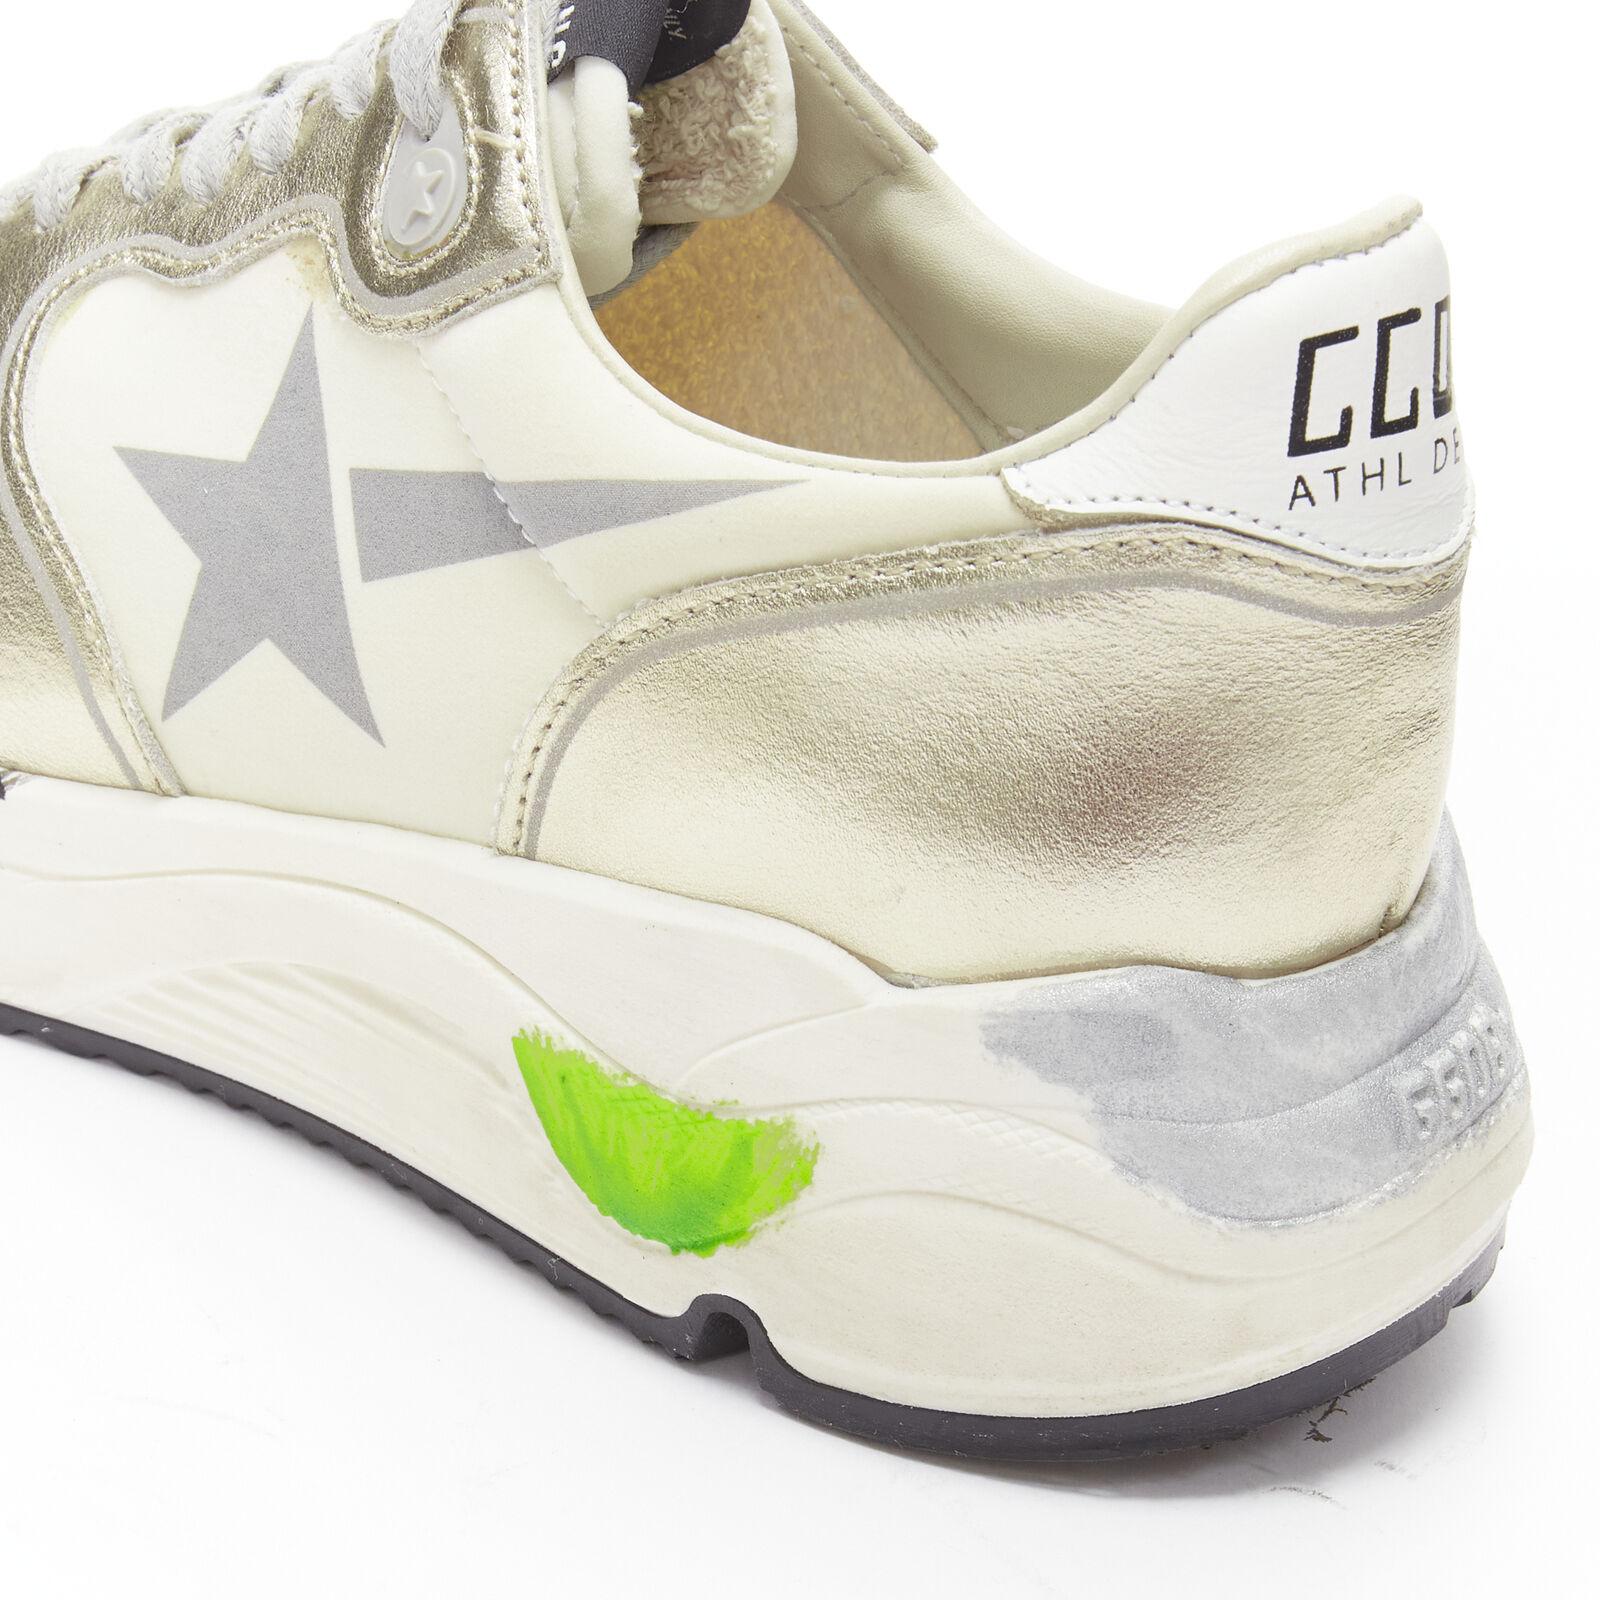 GOLDEN GOOSE Private EDT Running chunky metallic gold distressed sneaker EU38 For Sale 3